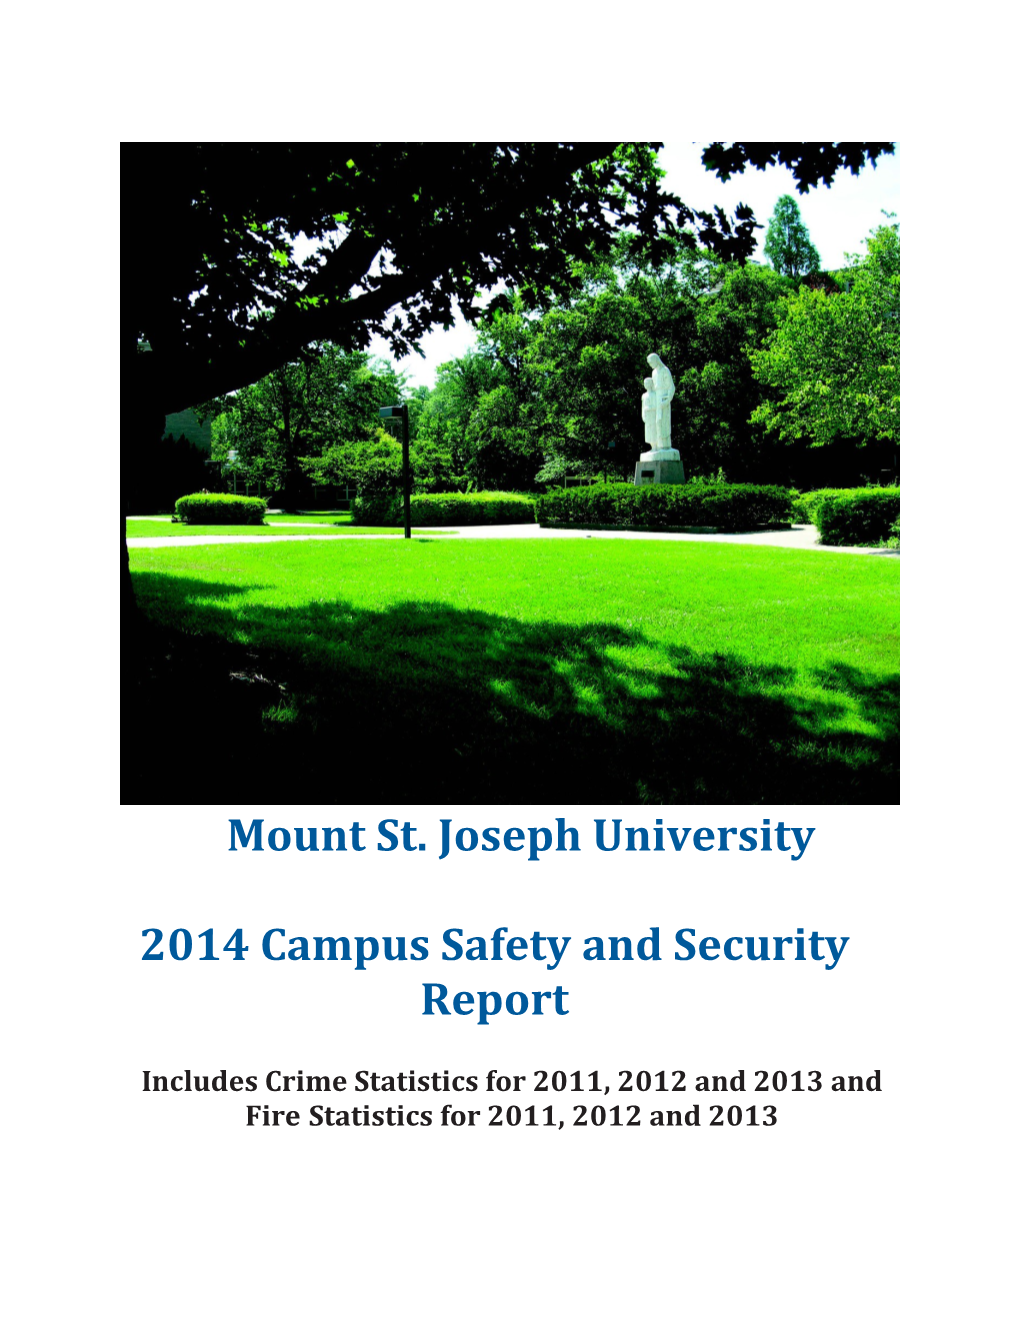 Includes Crime Statistics for 2011,2012 and 2013 And